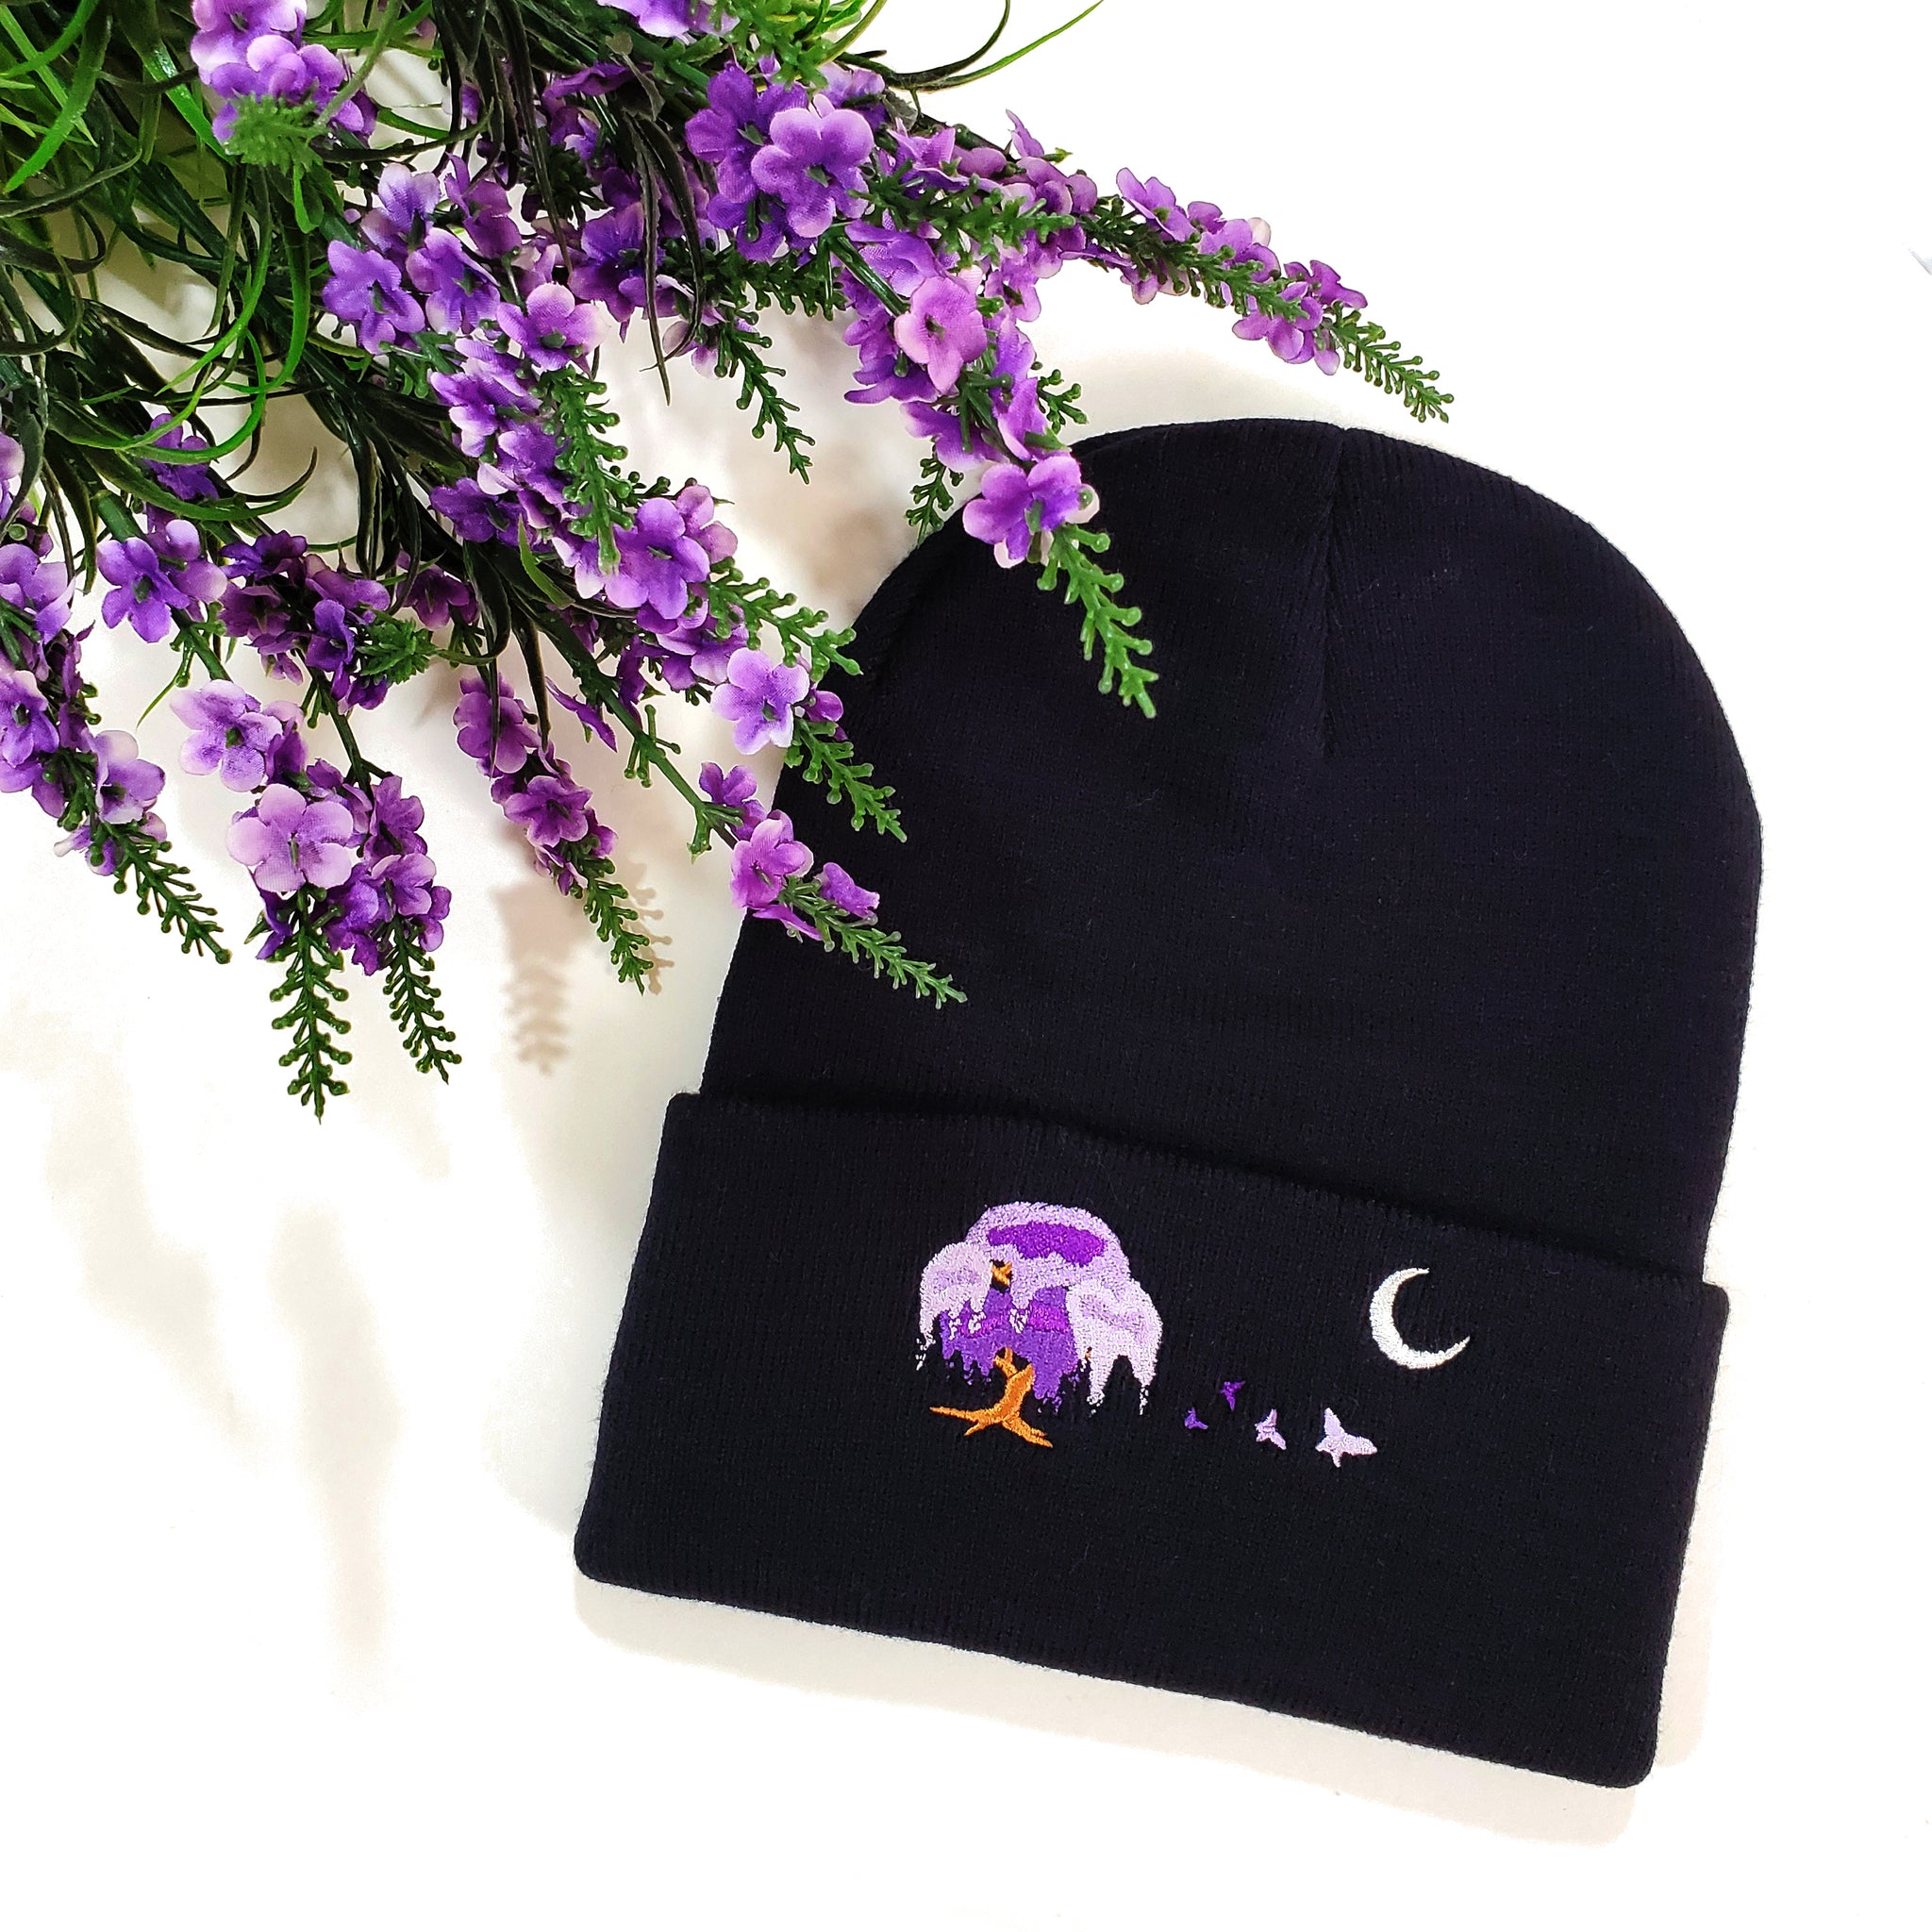 Wisteria Embroidered Beanie